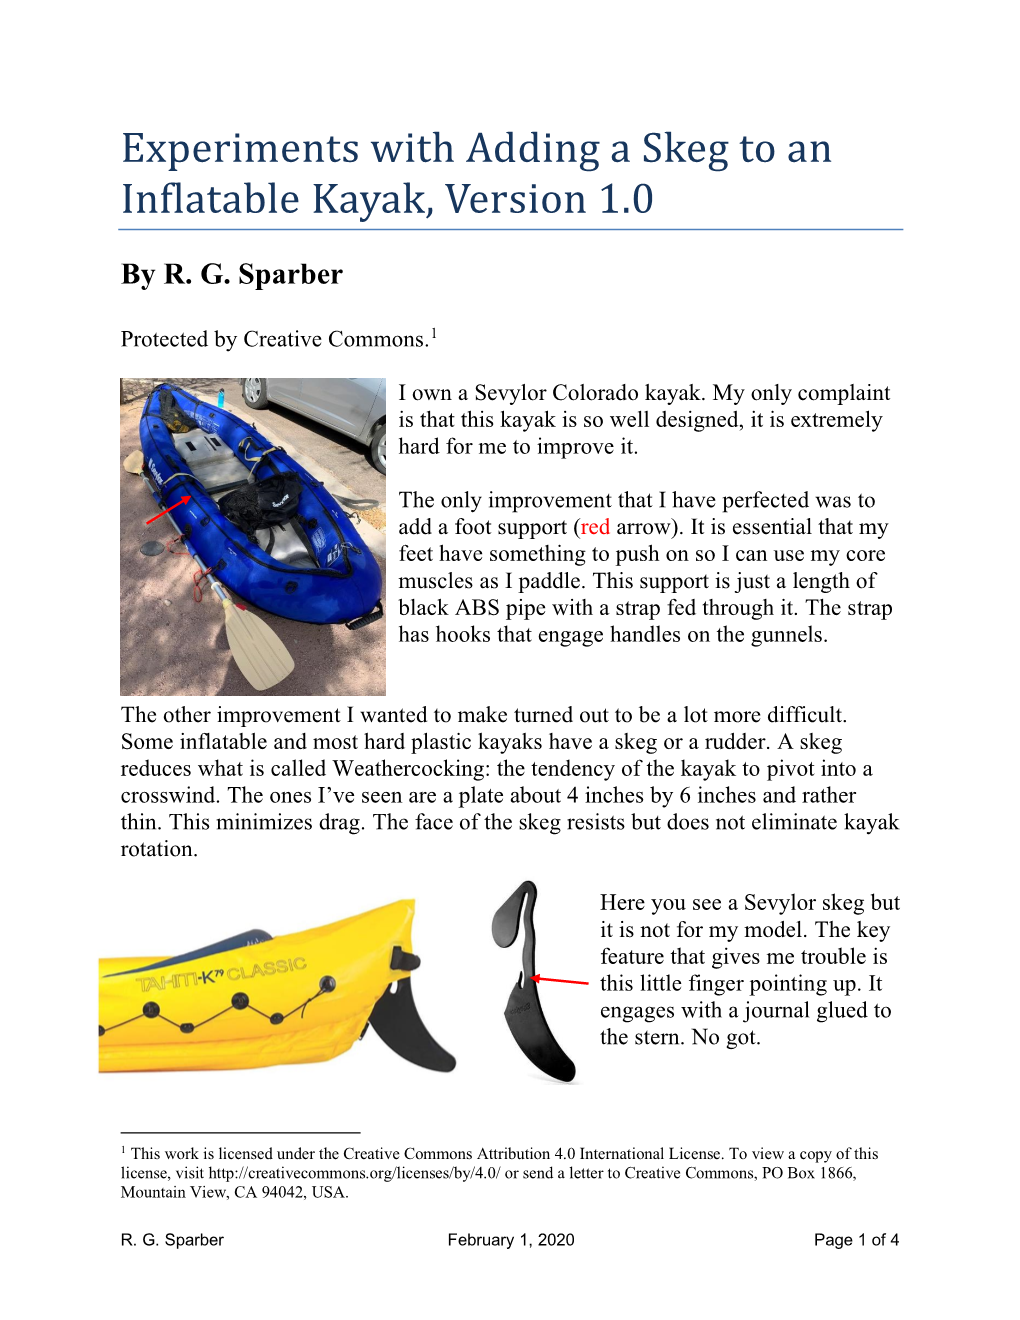 Experiments with Adding a Skeg to an Inflatable Kayak, Version 1.0